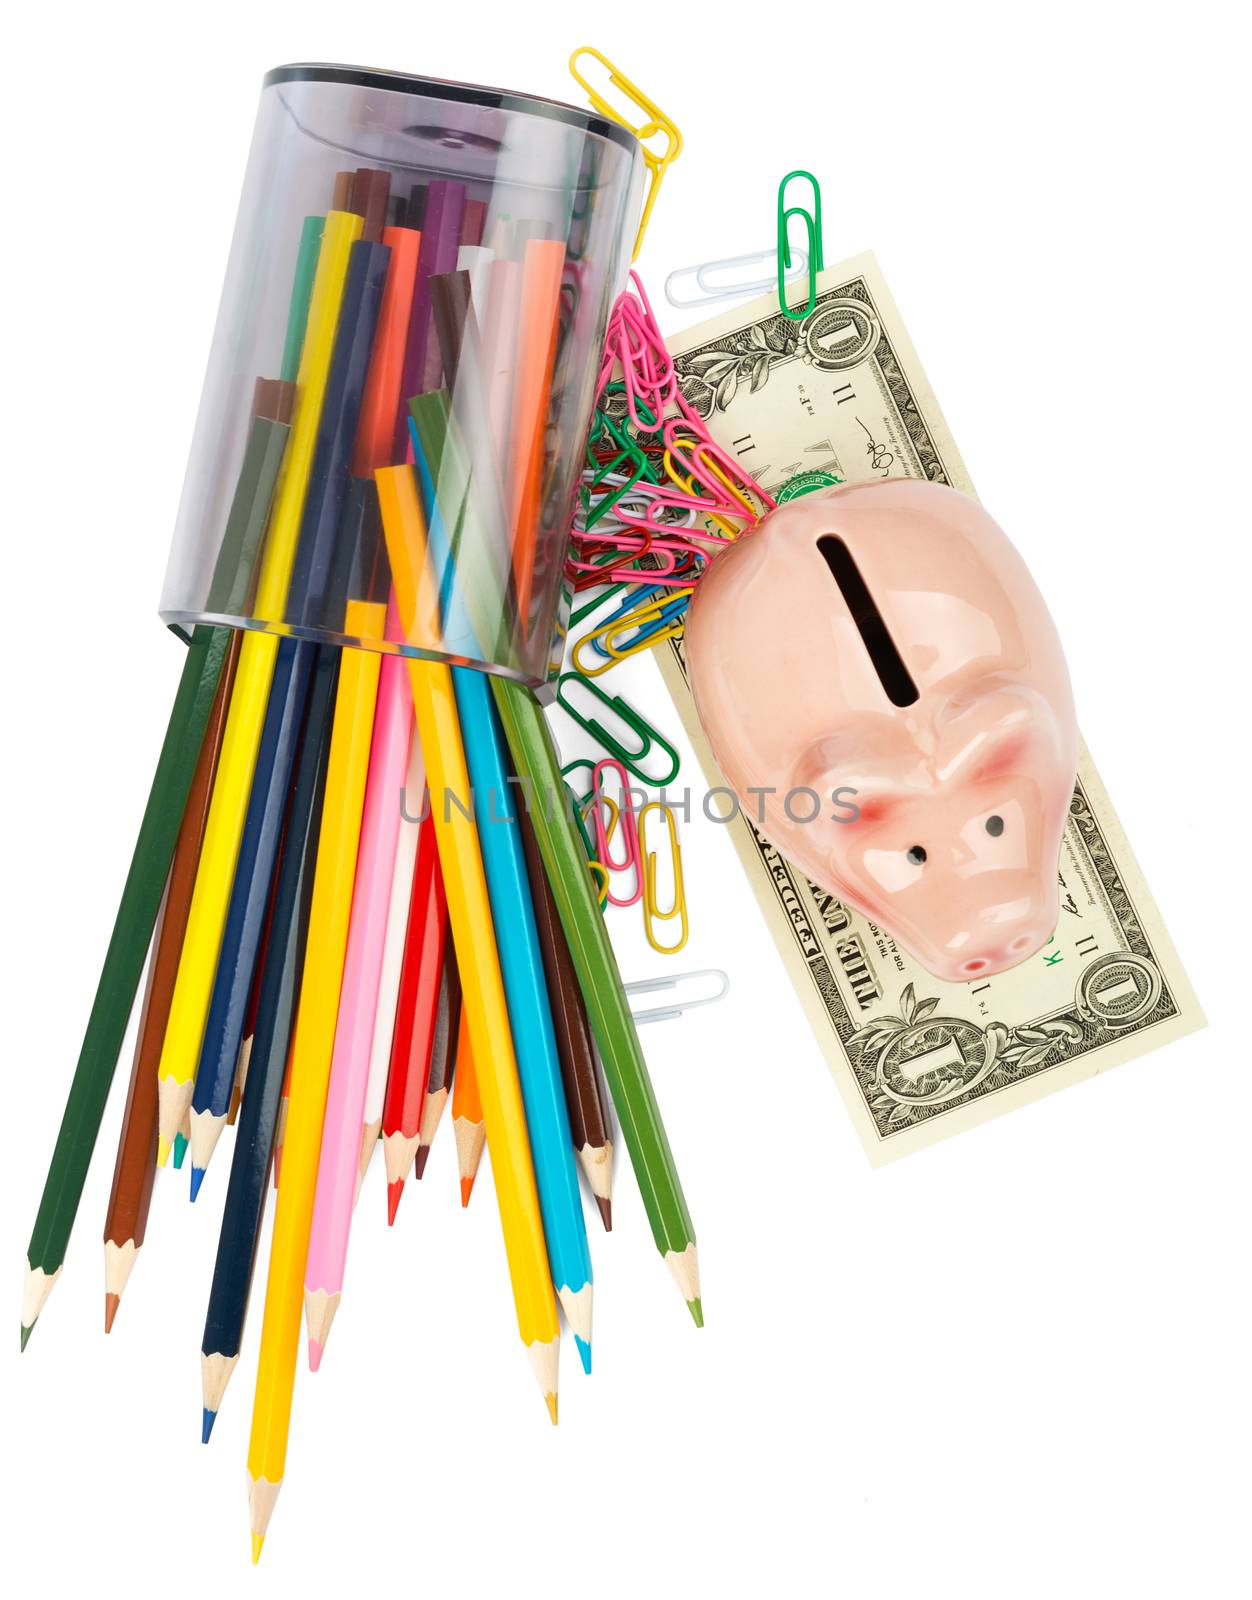 Piggy bank with crayons by cherezoff